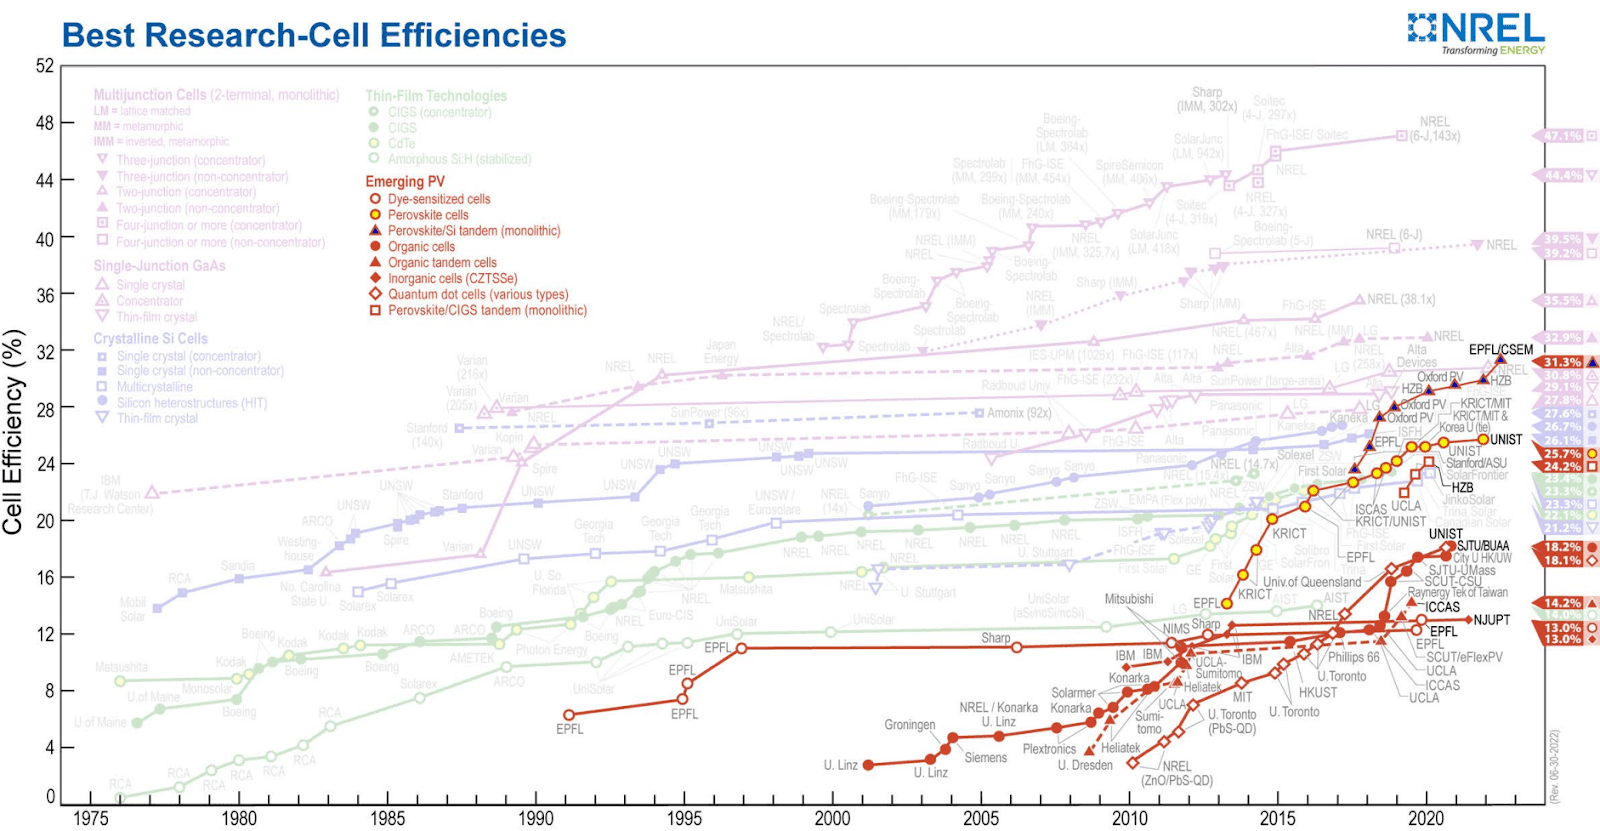 NREL record research cell efficiencies, emerging solar technologies specific. 